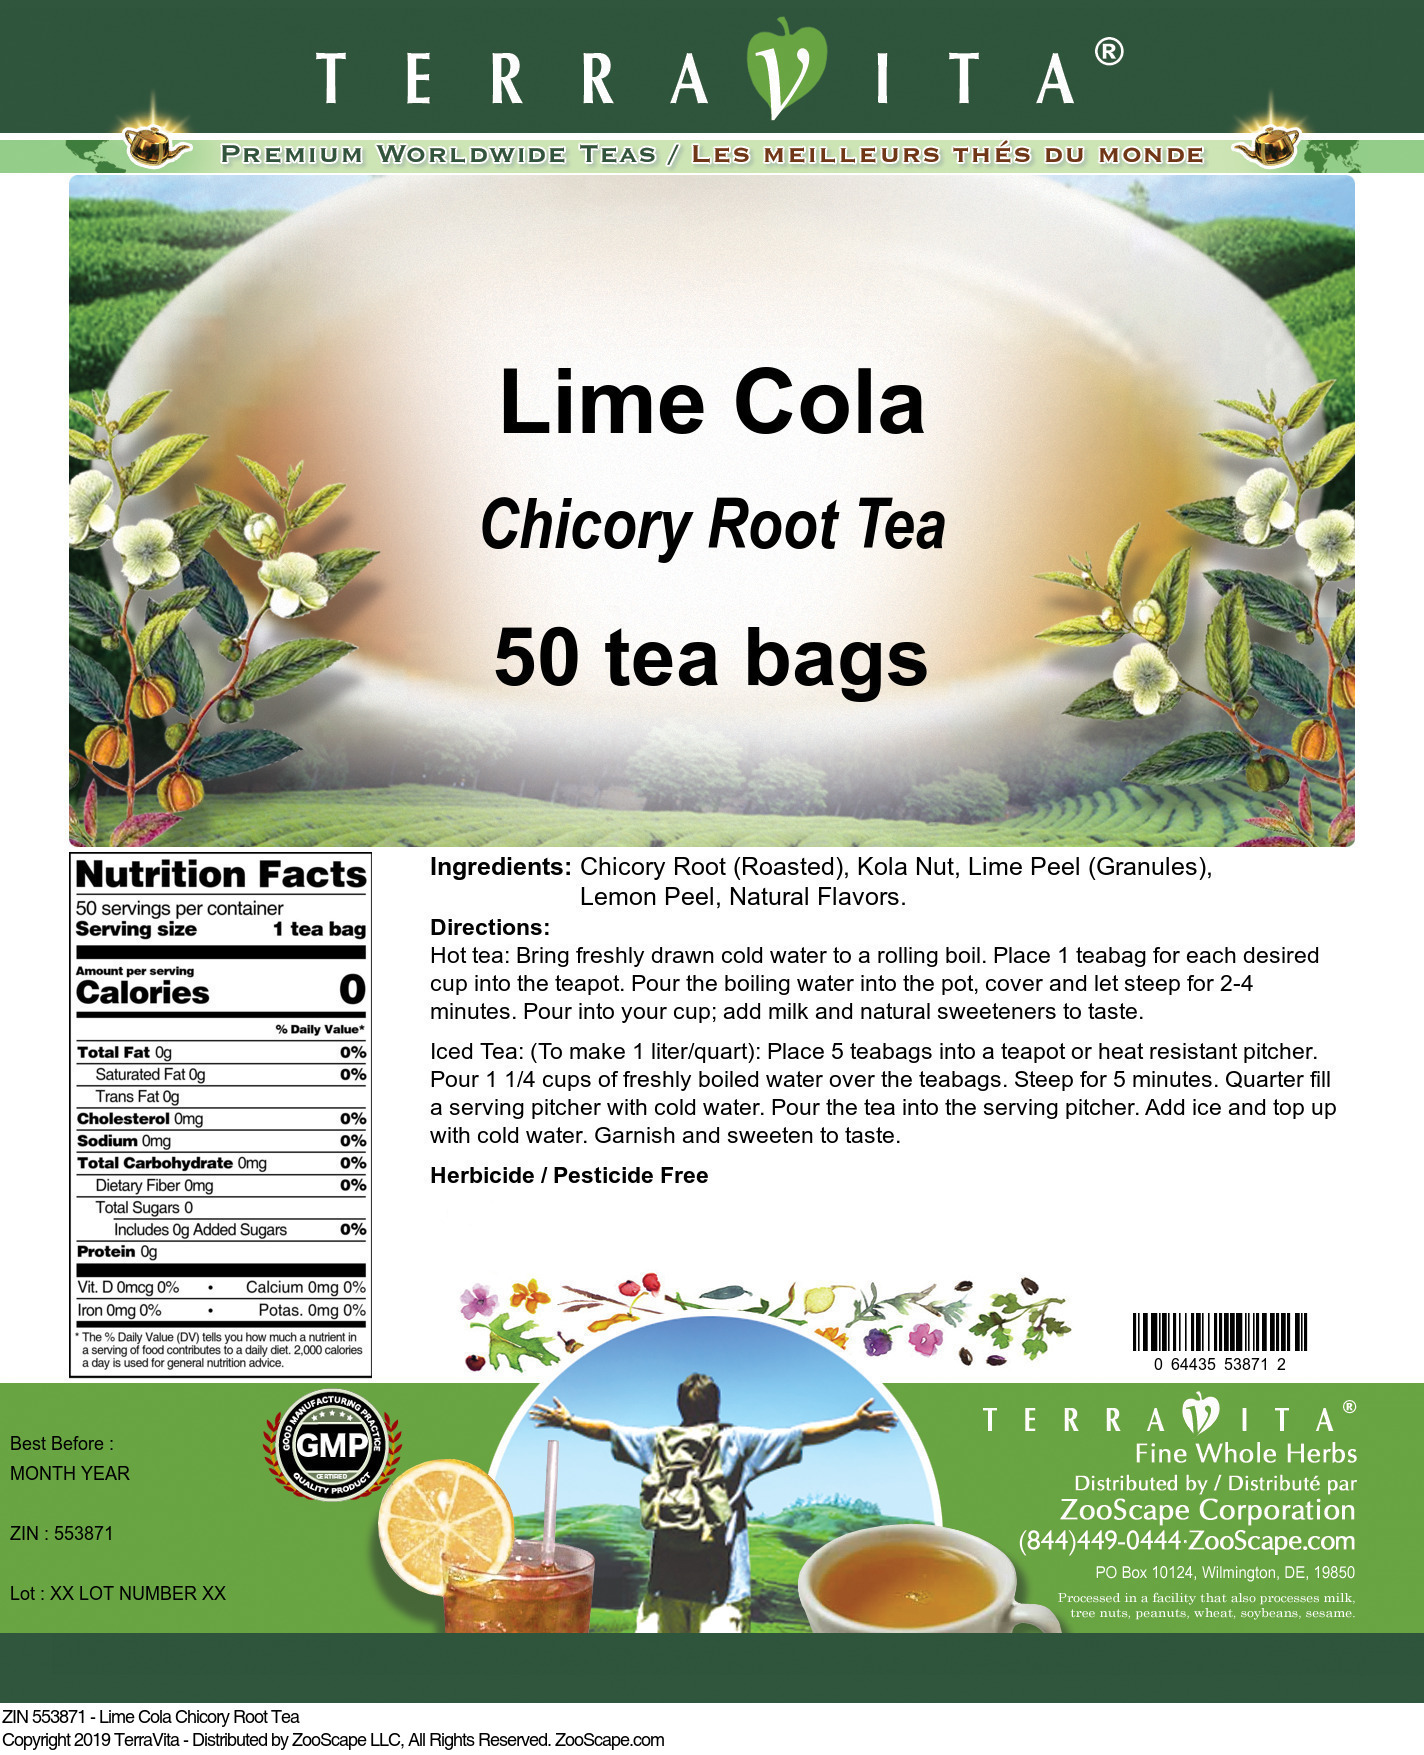 Lime Cola Chicory Root Tea - Label